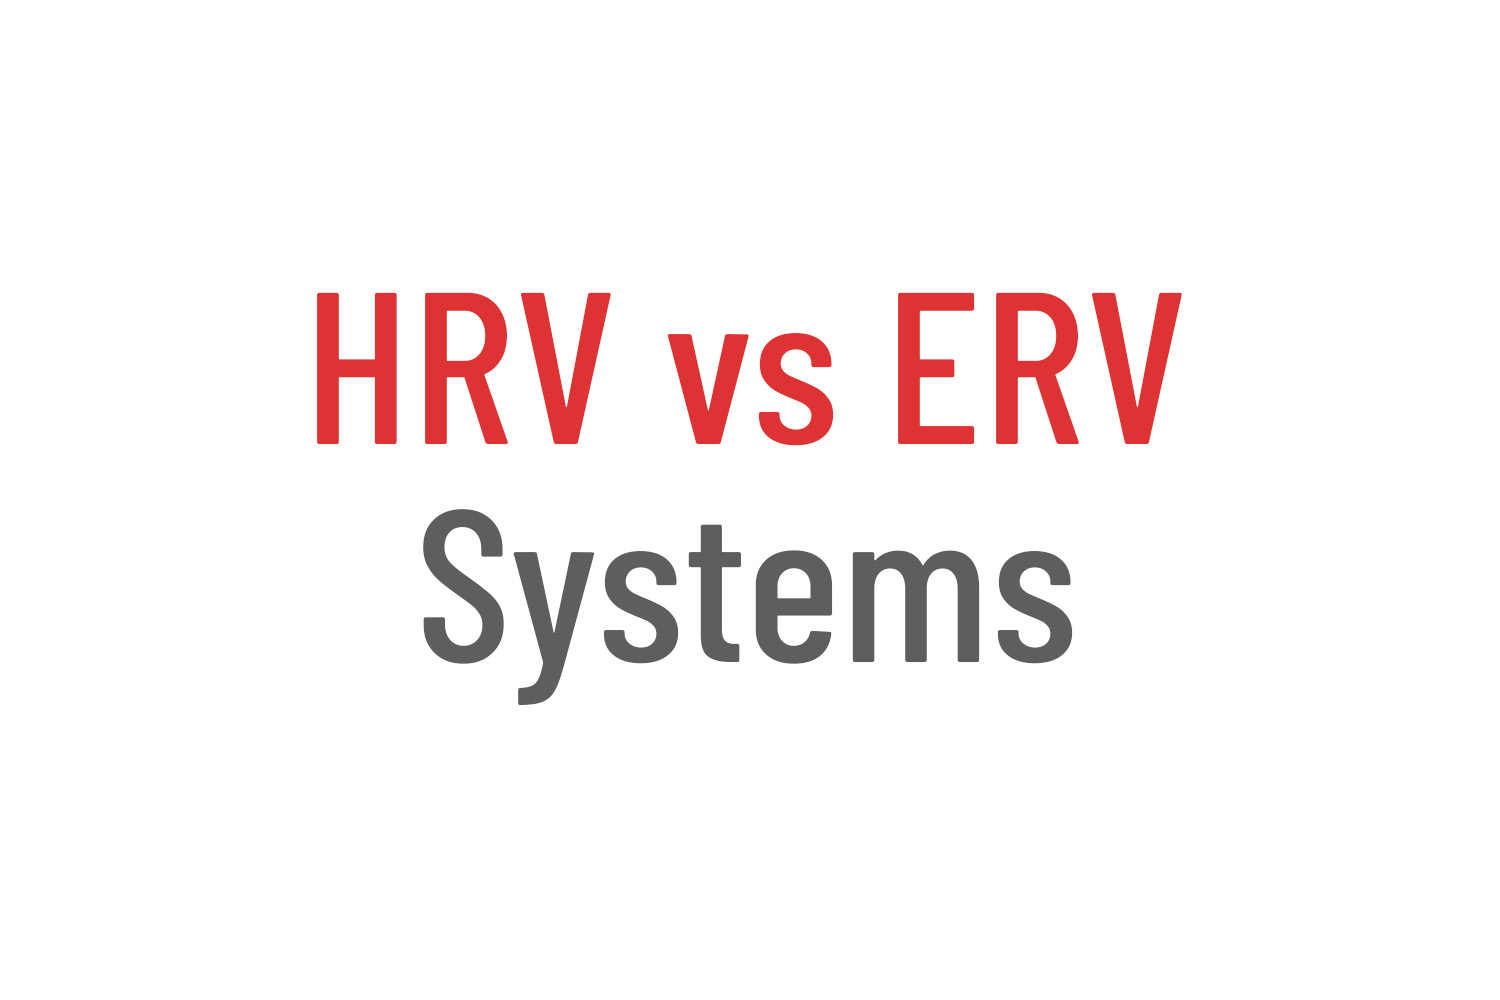 Difference Between HRV and ERV Systems